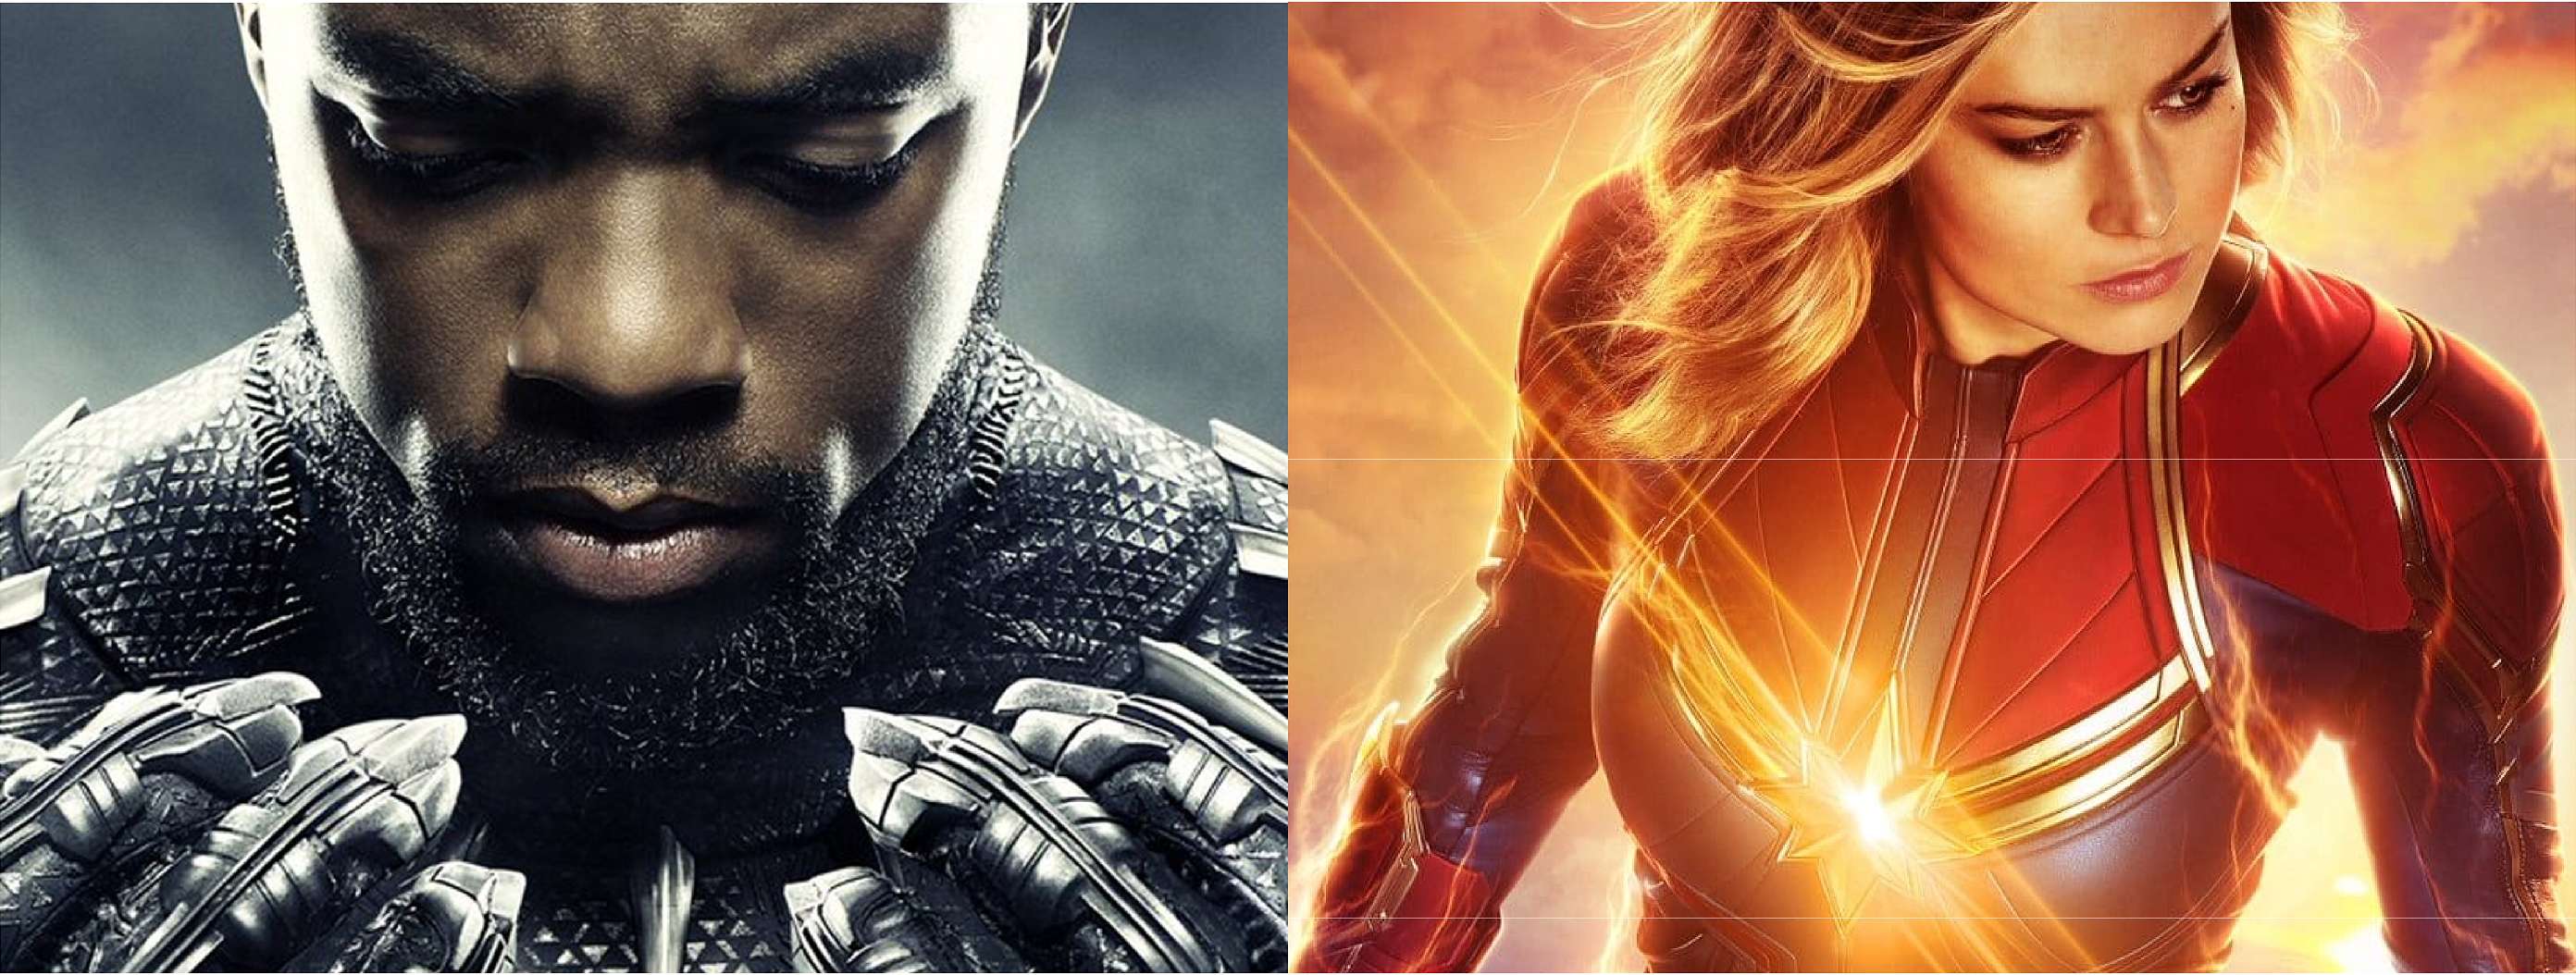 Avengers: Screenwriters Address The Roles For Captain Marvel And Black Panther In Endgame [SPOILERS]